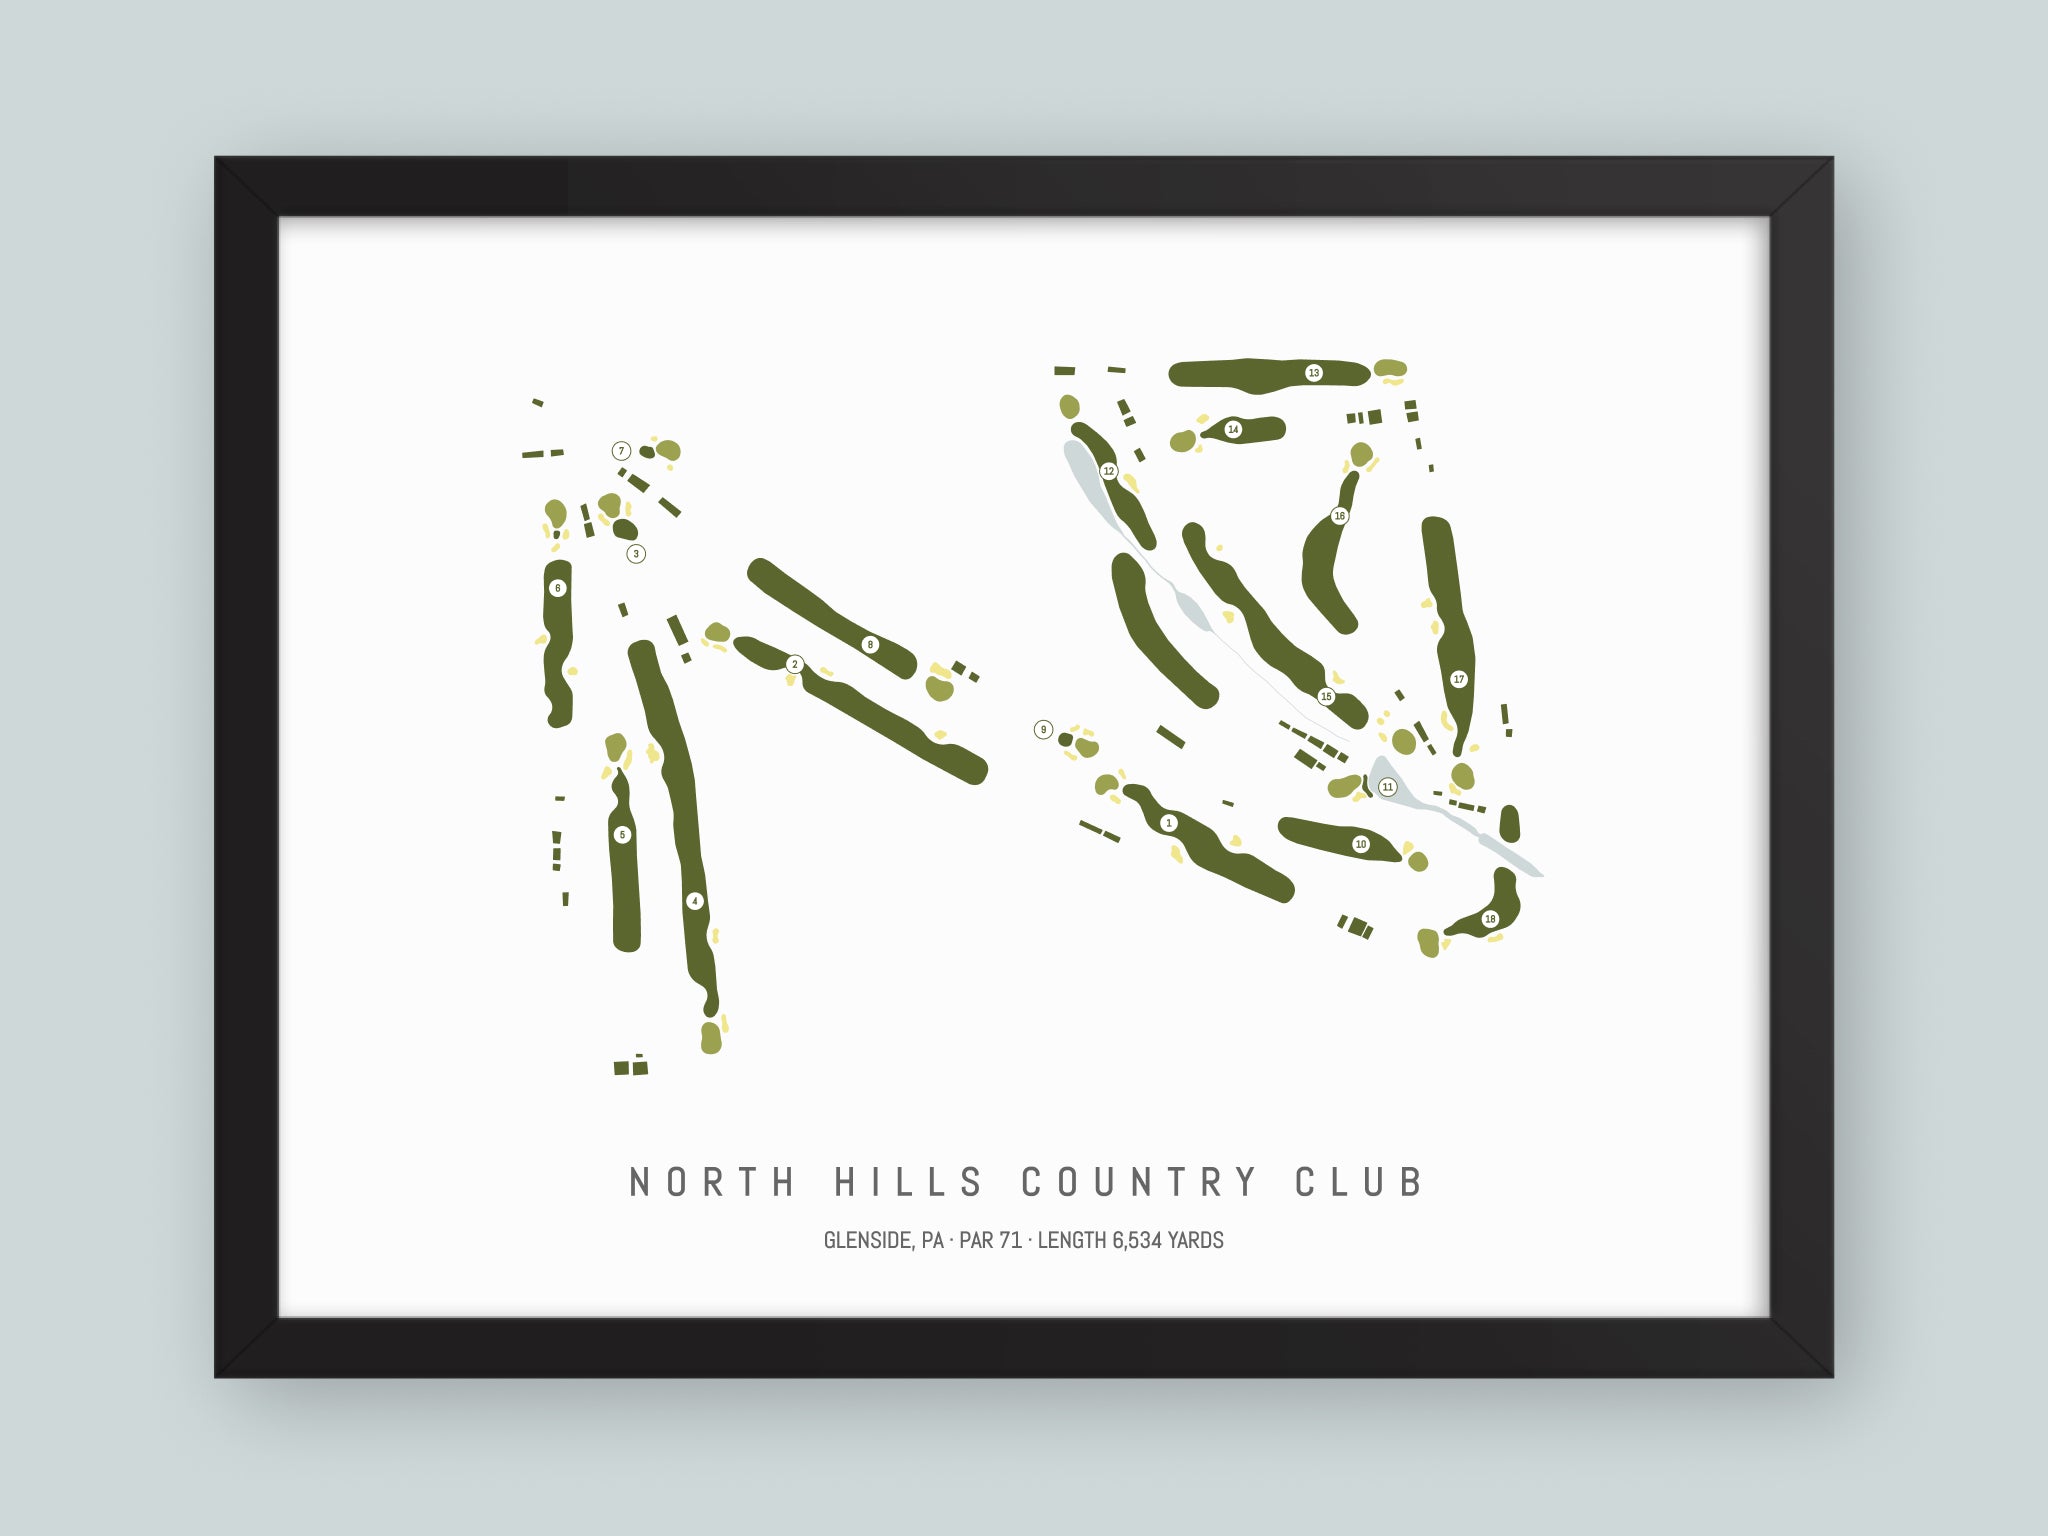 North-Hills-Country-Club-PA--Black-Frame-24x18-With-Hole-Numbers